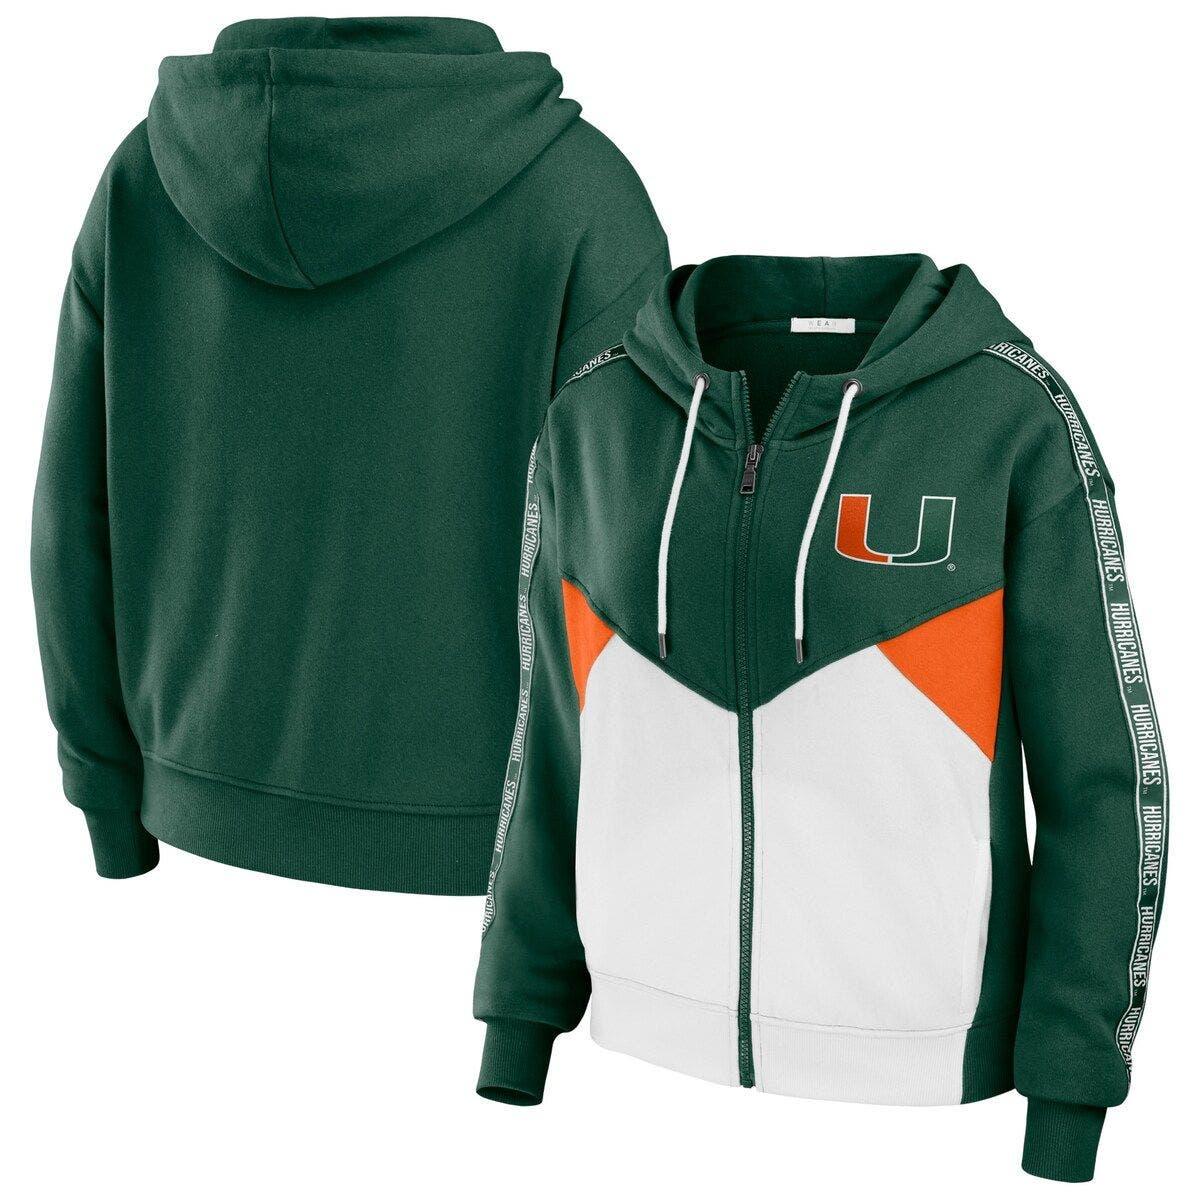 Wear by Erin Andrews Heathered Gray Miami Dolphins Team Full-Zip Hoodie